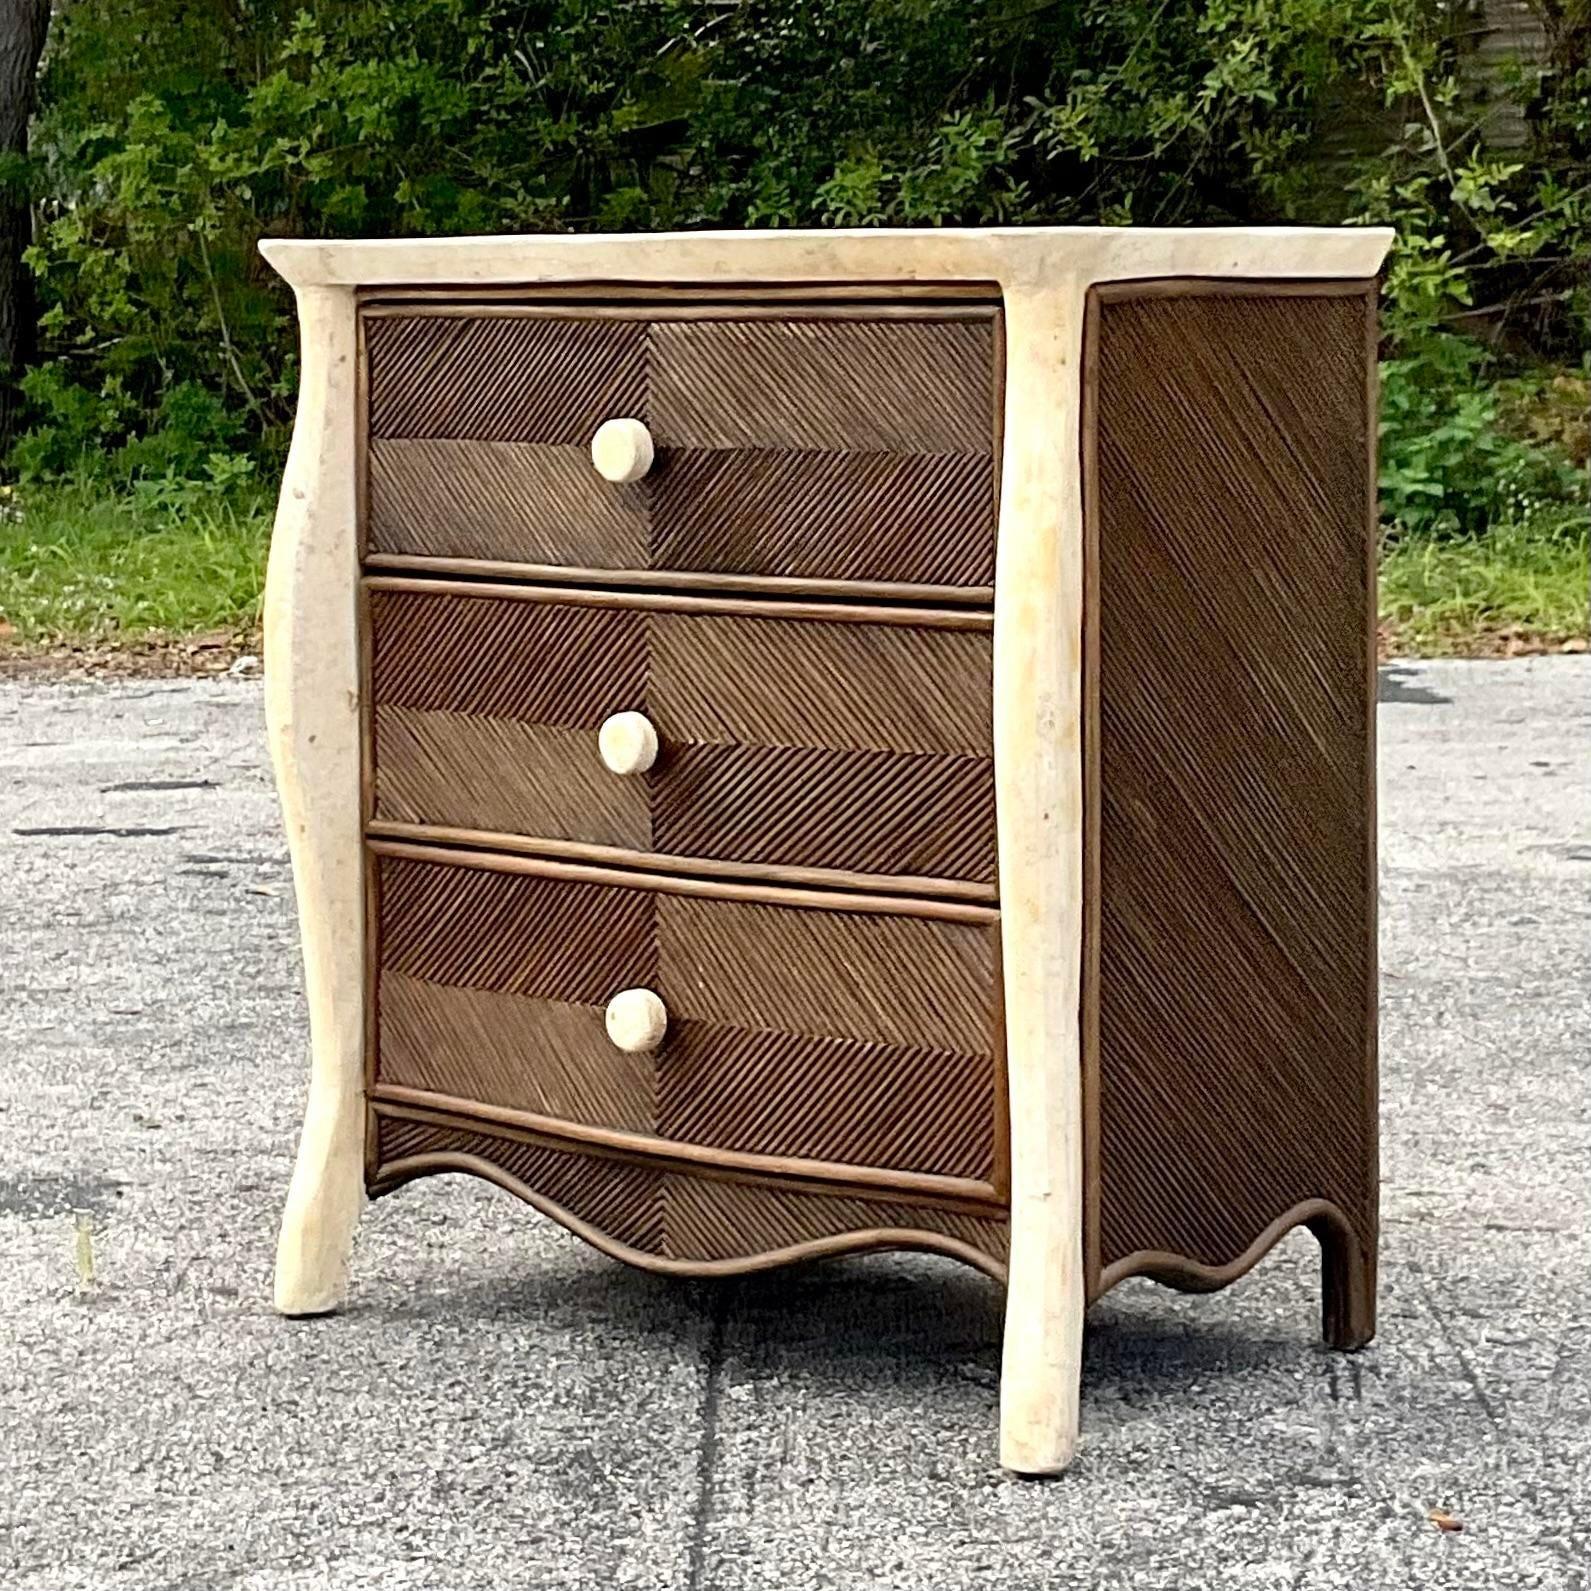 Late 20th Century Vintage Coastal Chevron Pencil Reed Chest of Drawers In Good Condition For Sale In west palm beach, FL